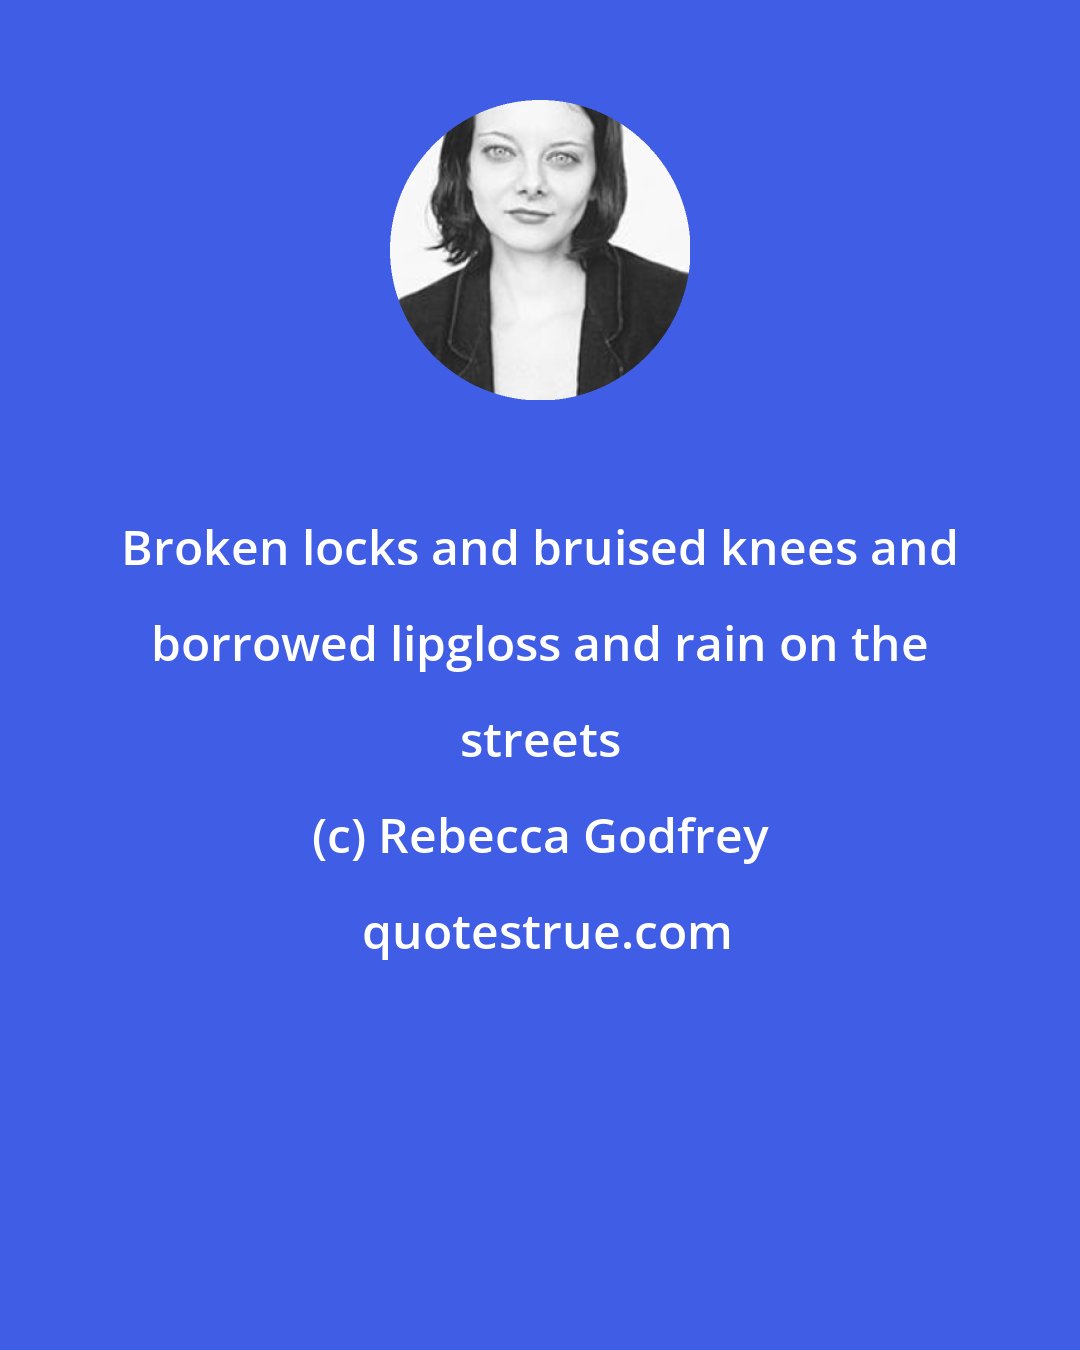 Rebecca Godfrey: Broken locks and bruised knees and borrowed lipgloss and rain on the streets